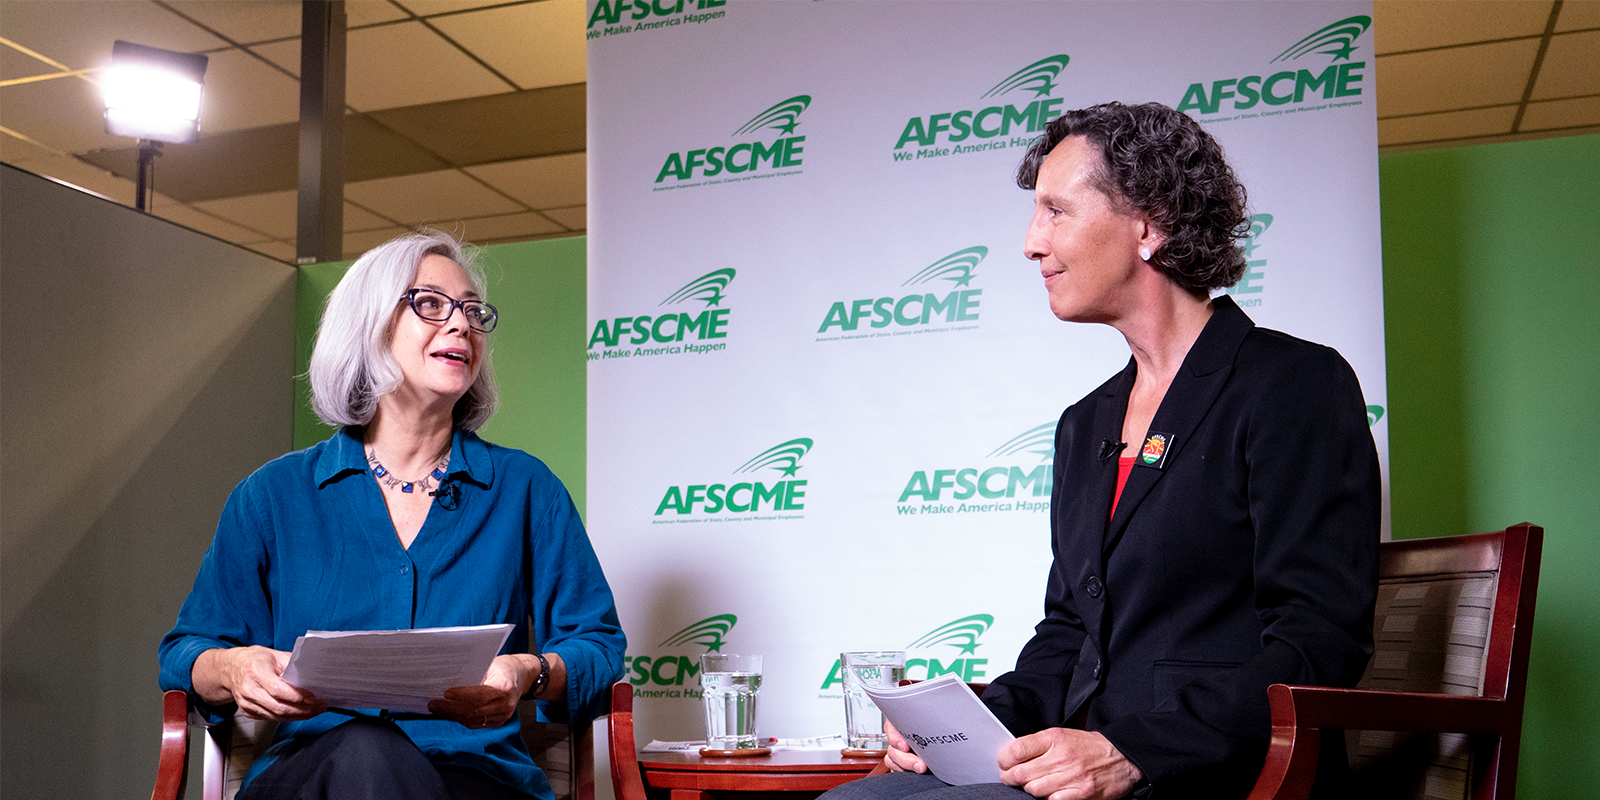 Ideas@AFSCME: How to Make the Economy Work for Everyone